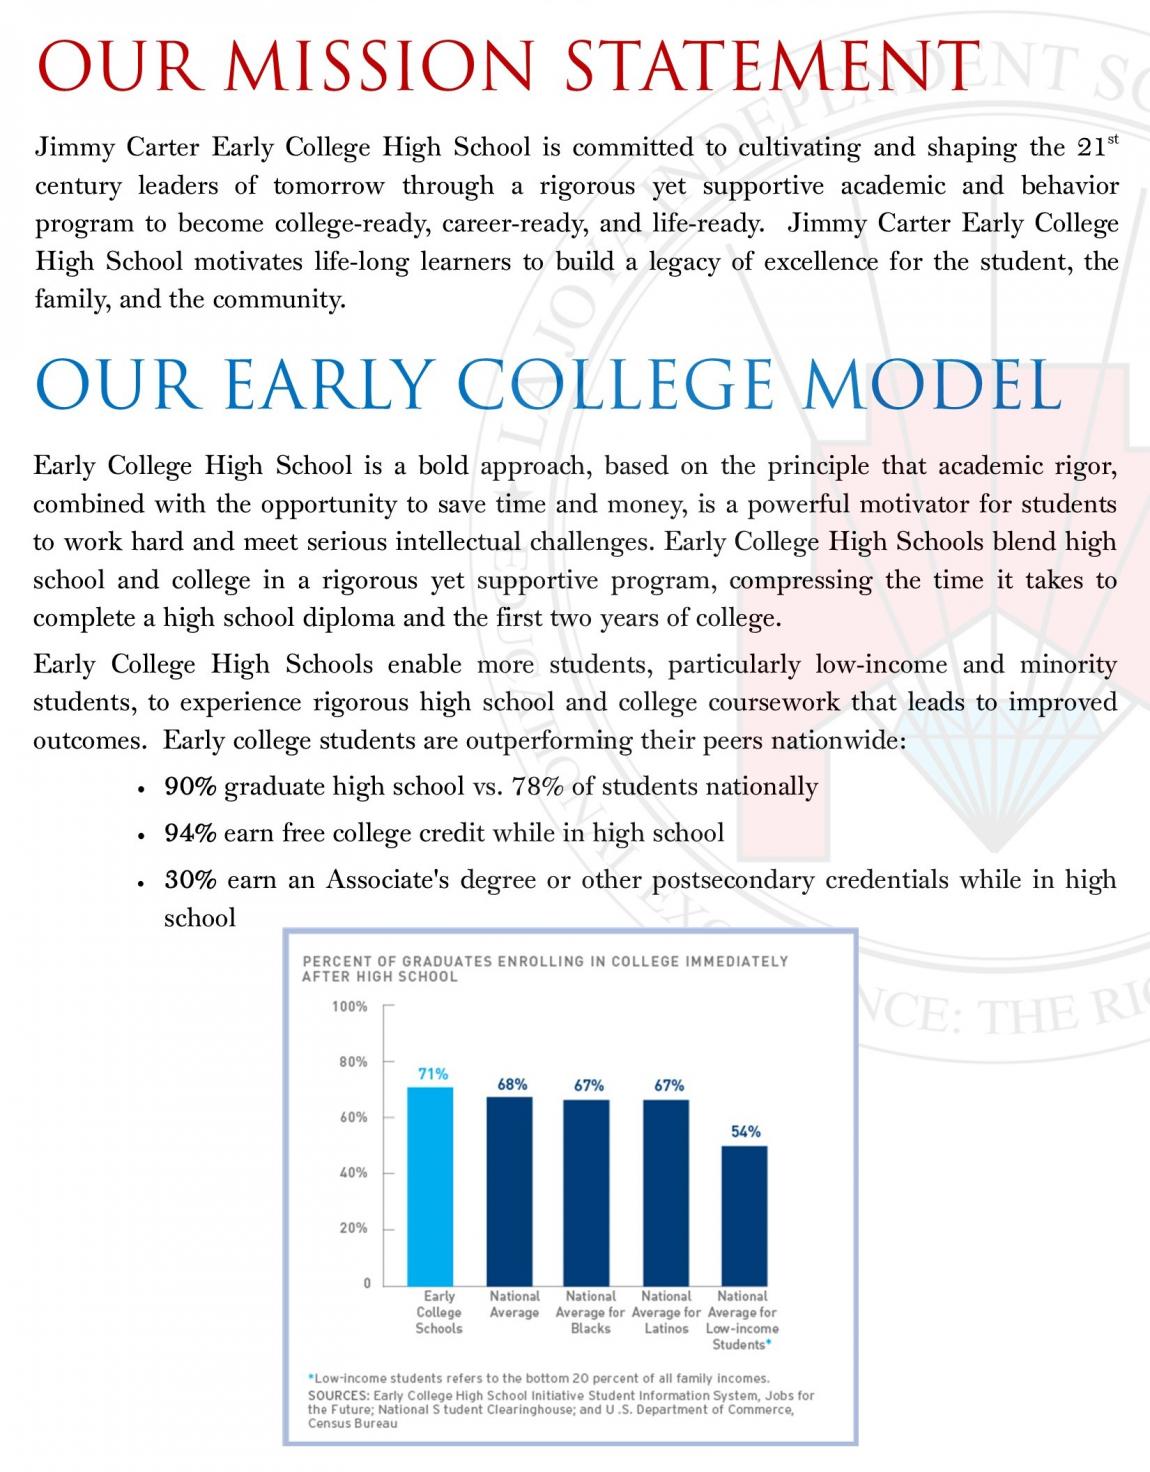 mission statement and early college model